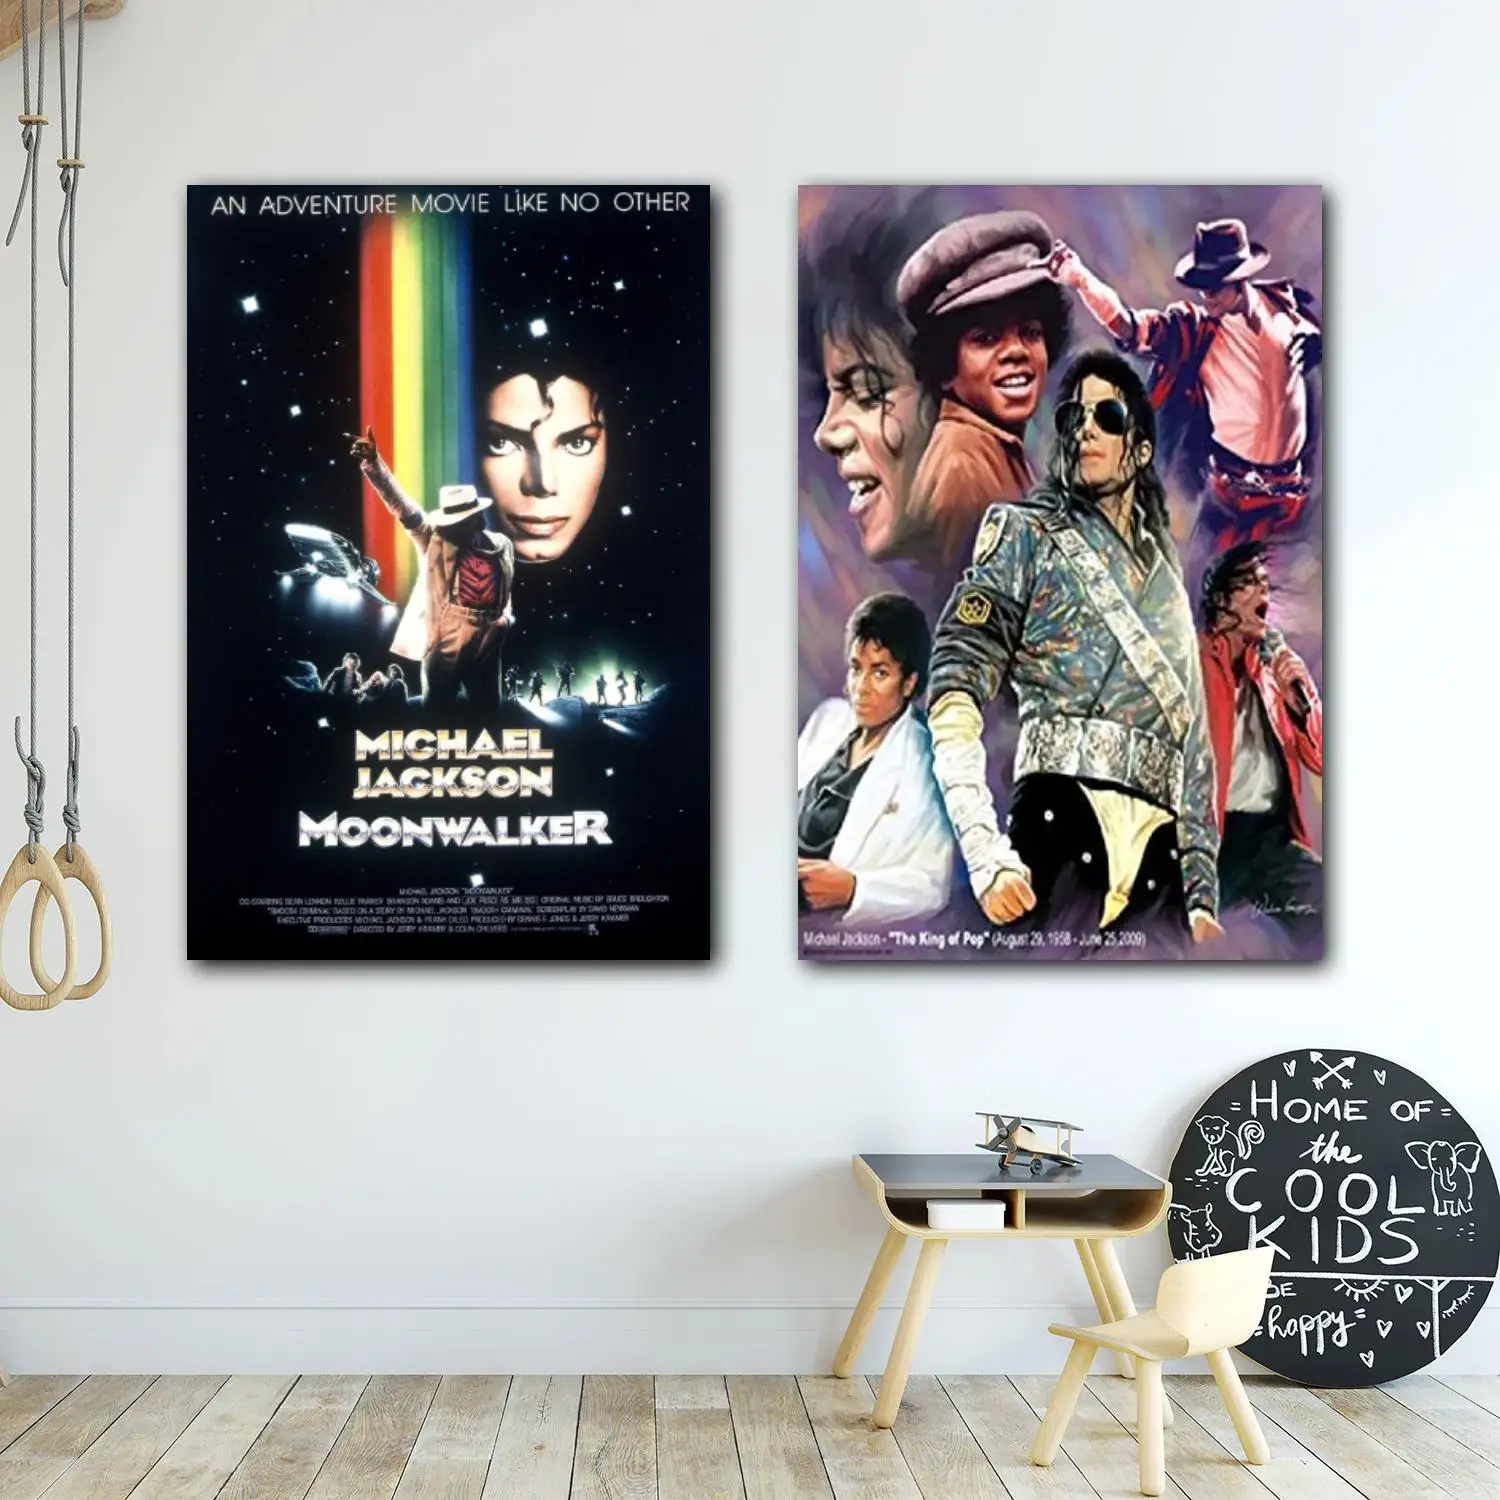 

michael jackson bad singer Decorative Canvas 24x36 Posters Room Bar Cafe Decor Gift Print Art Wall Paintings